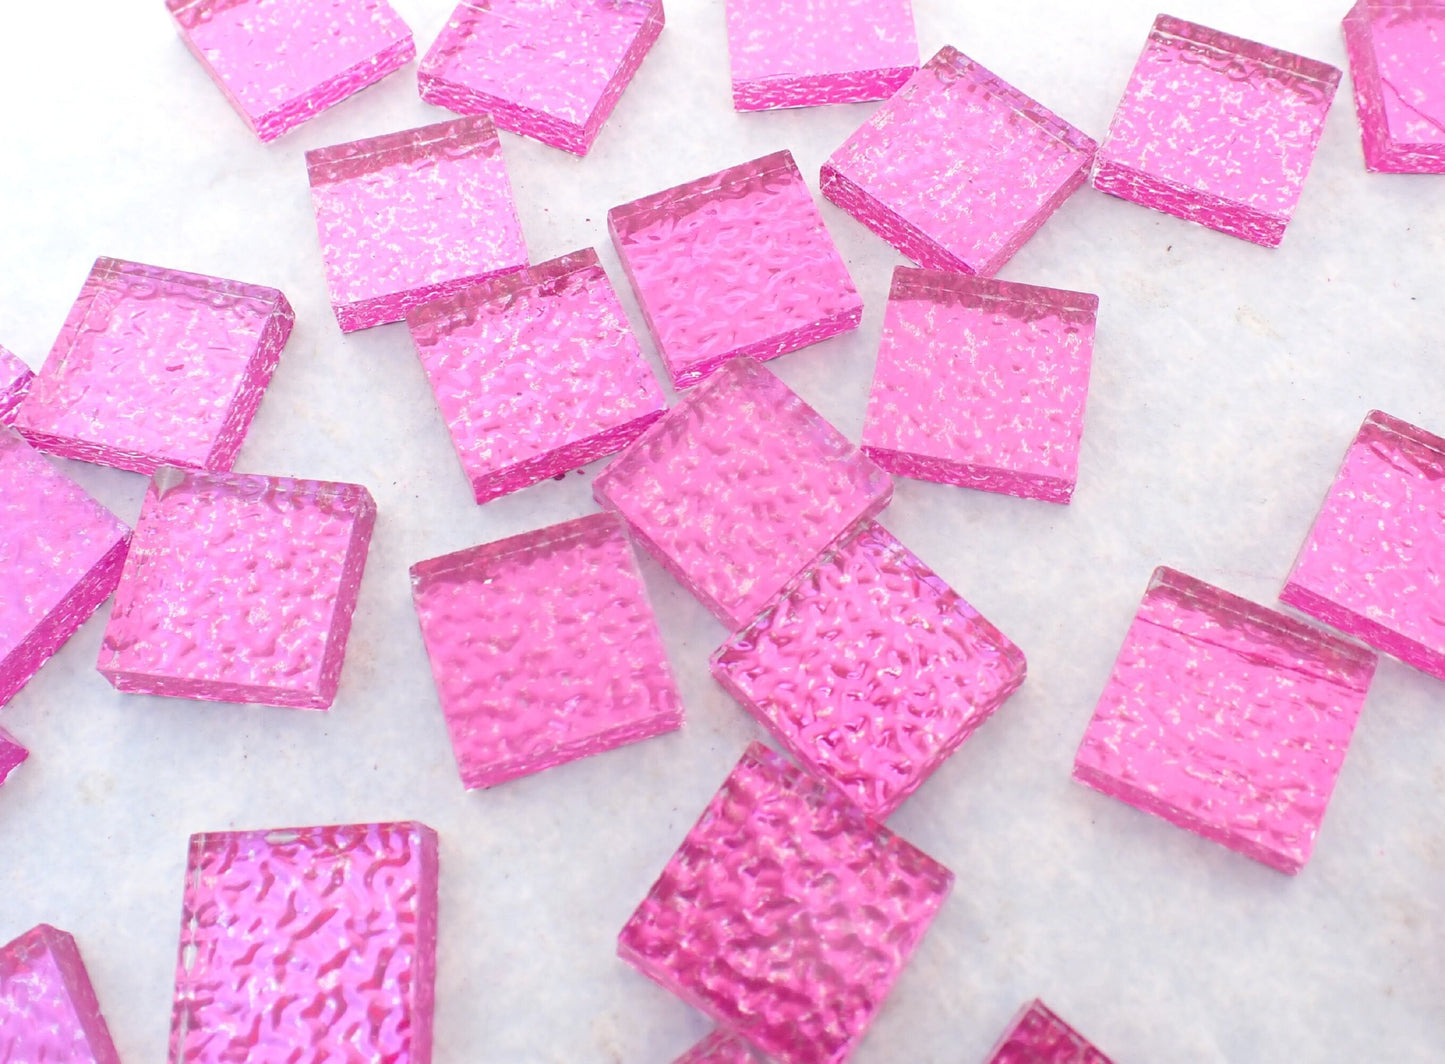 Fuchsia Textured Mirror Square Tiles - 50g - Approx 25 Glass Mosaic Tiles - 15mm